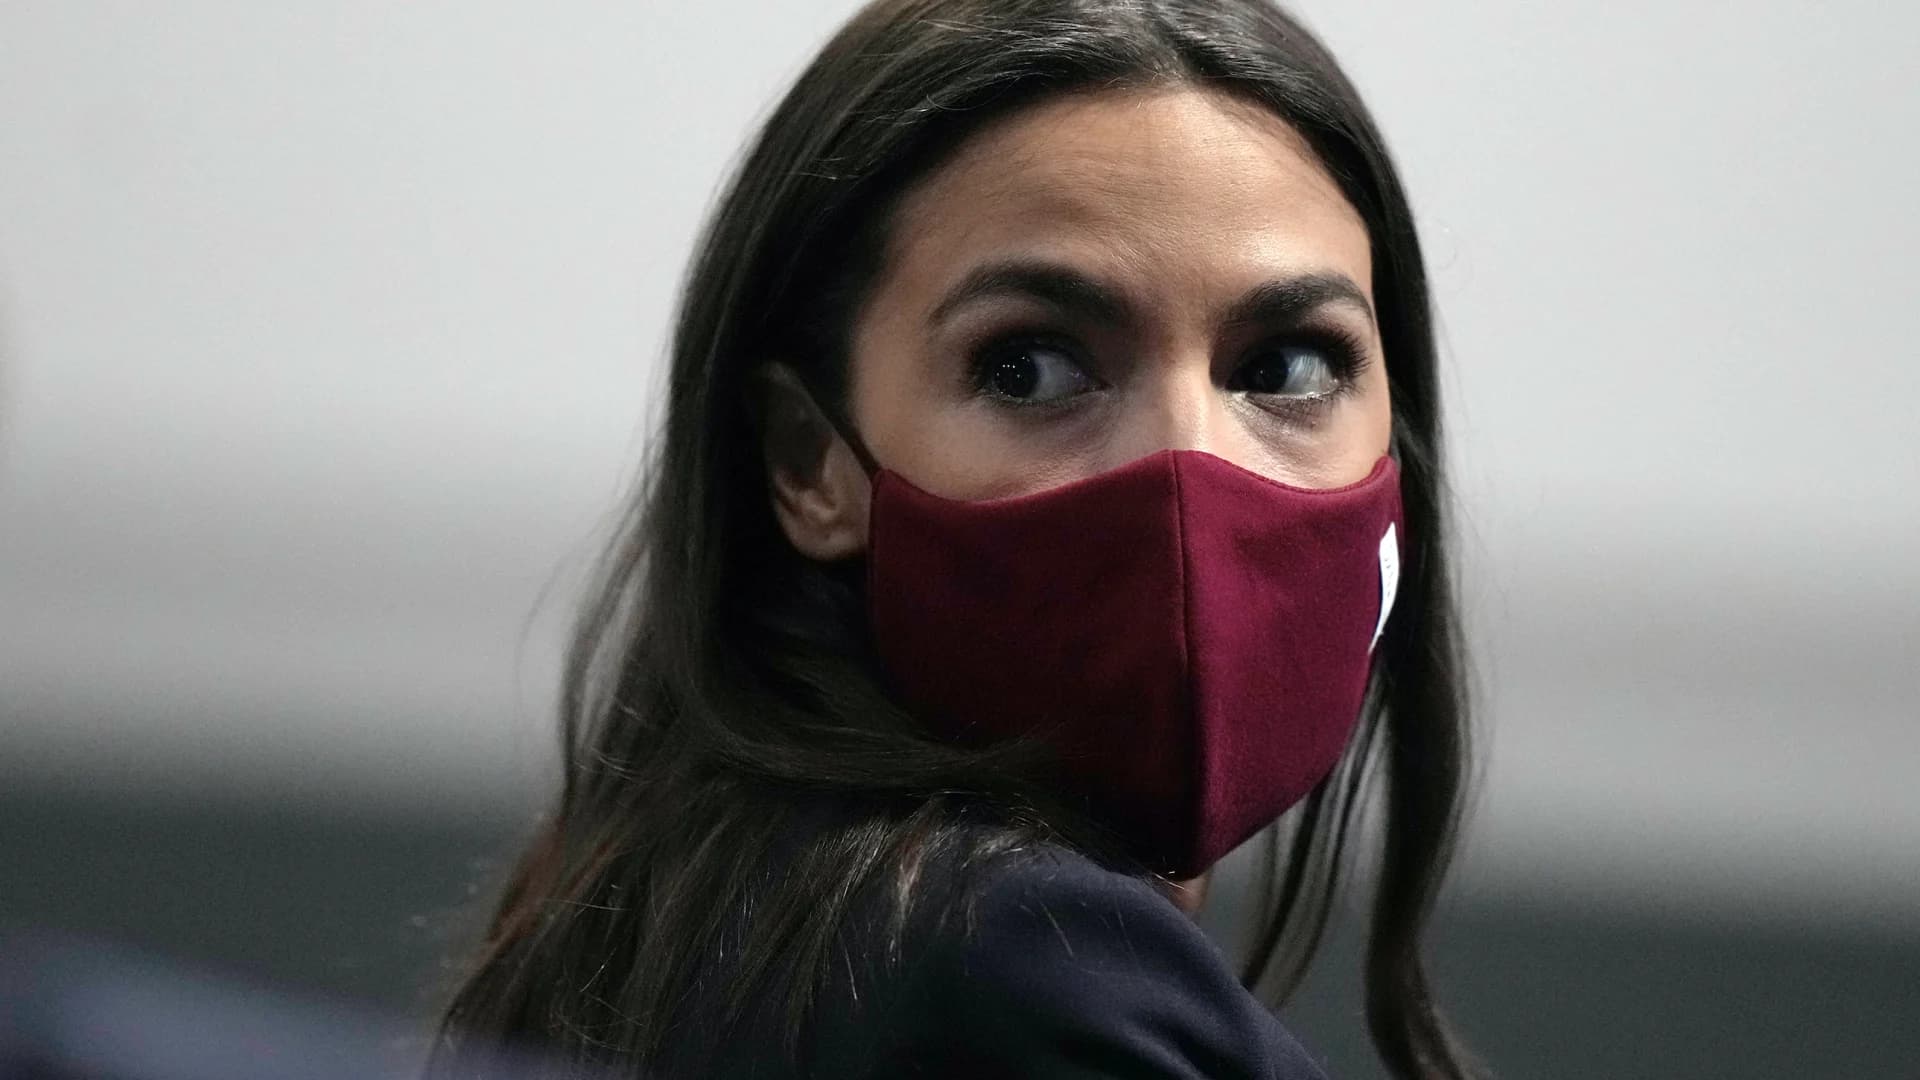 Rep. Alexandria Ocasio-Cortez tests positive for COVID-19, recovering at home